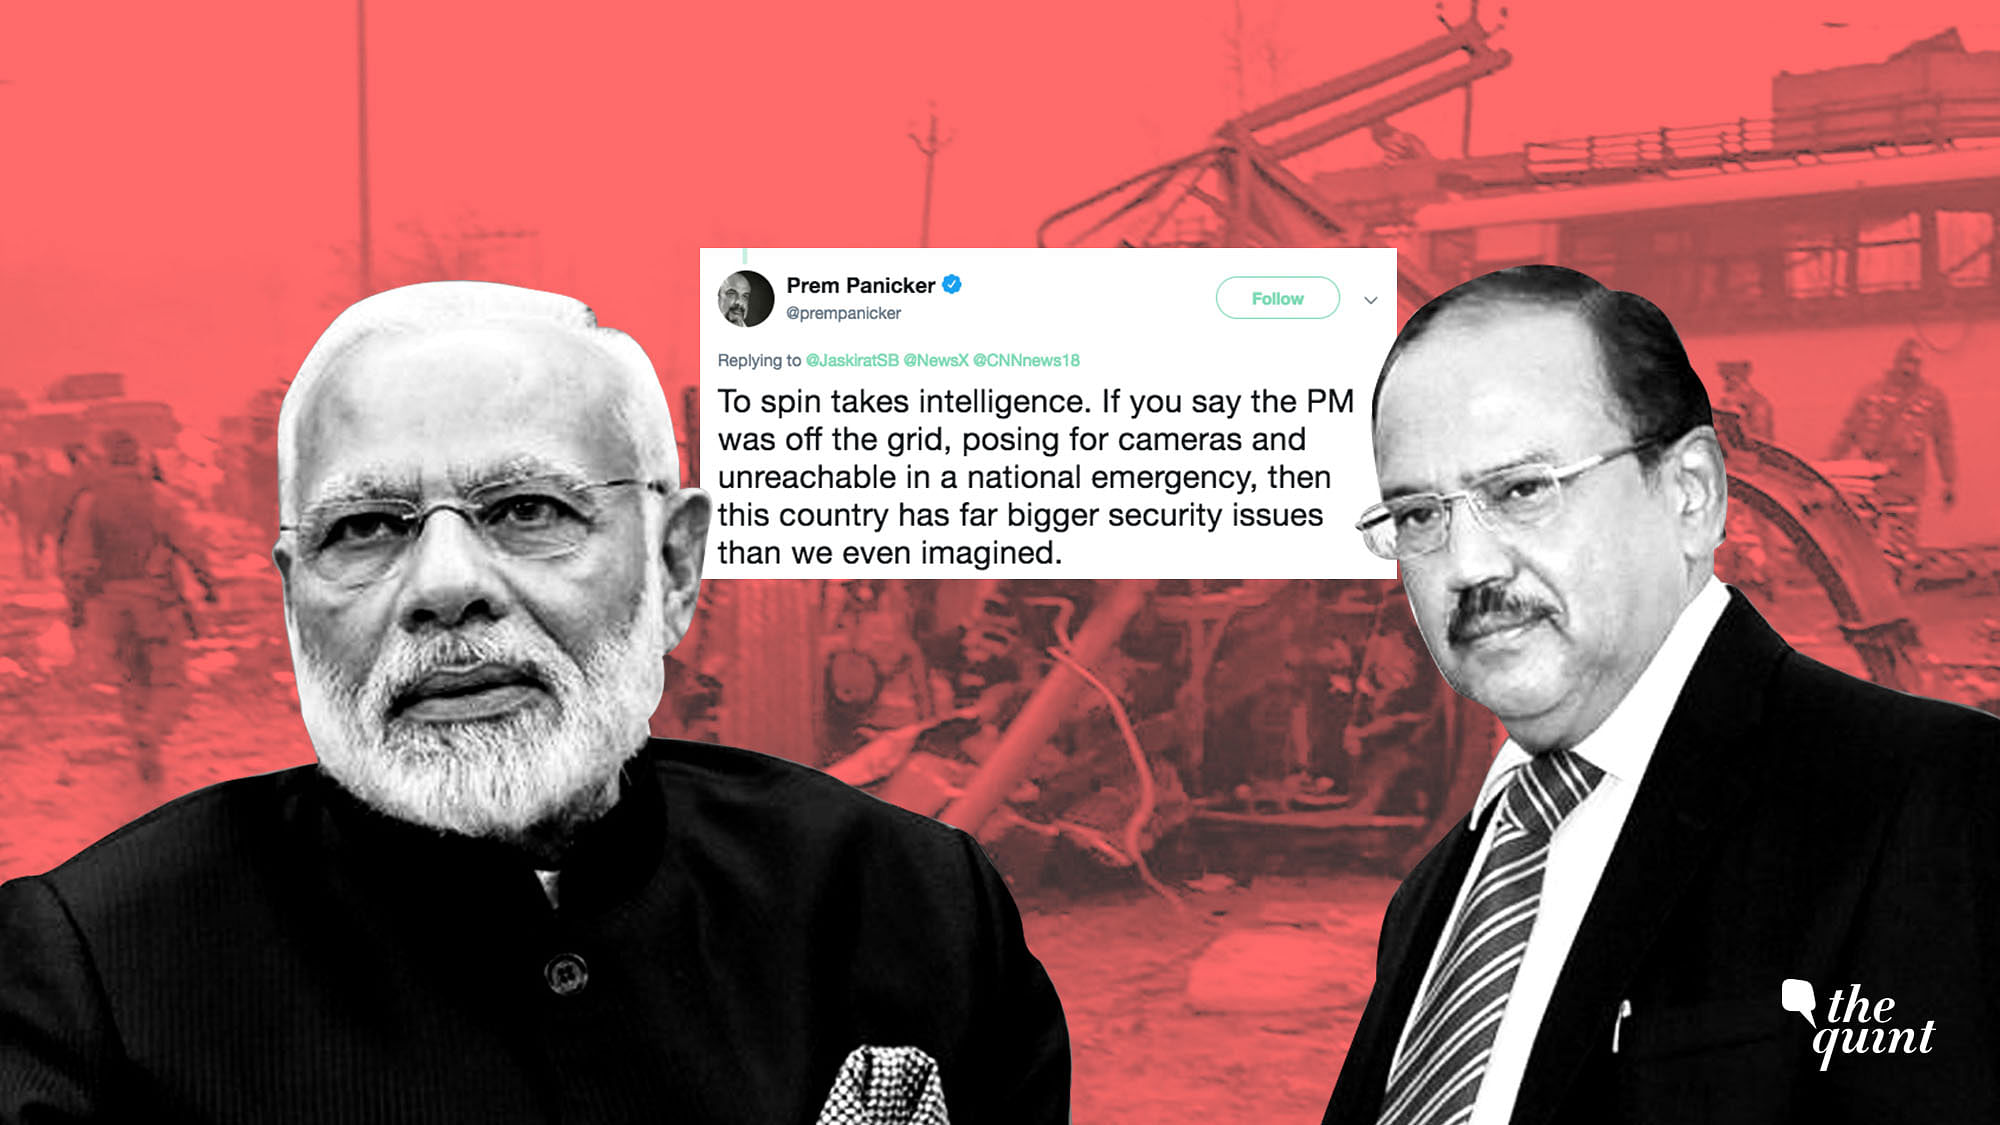 A news report, which has now been deleted, claimed that Prime Minister Narendra Modi is “miffed” with NSA Ajit Doval over “late info”.